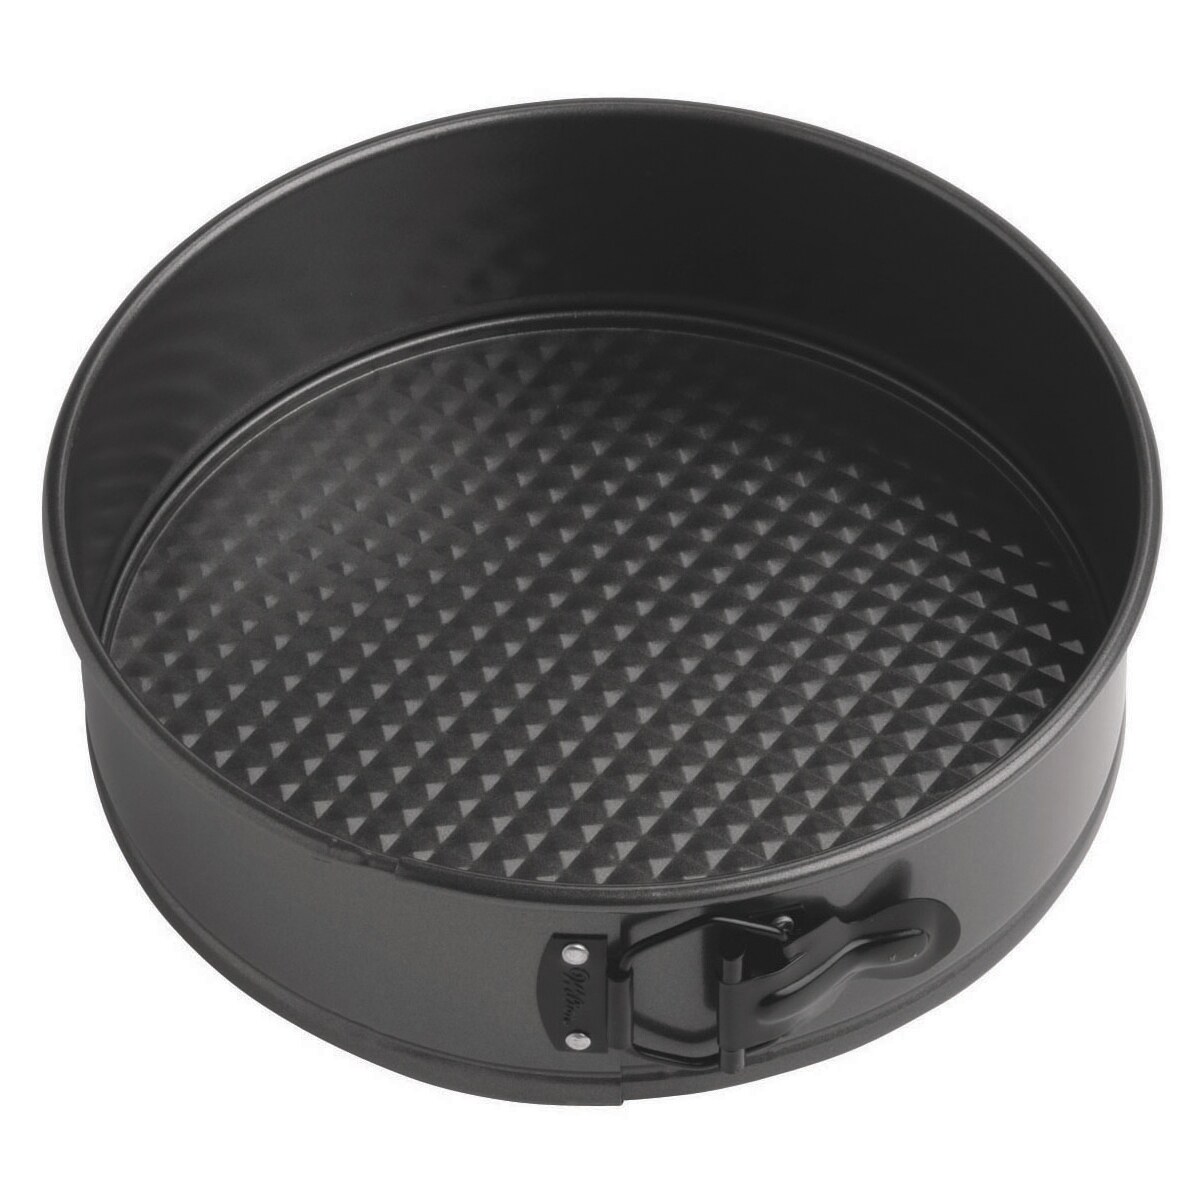 Norpro Nonstick 10-inch Springform With Glass Base 